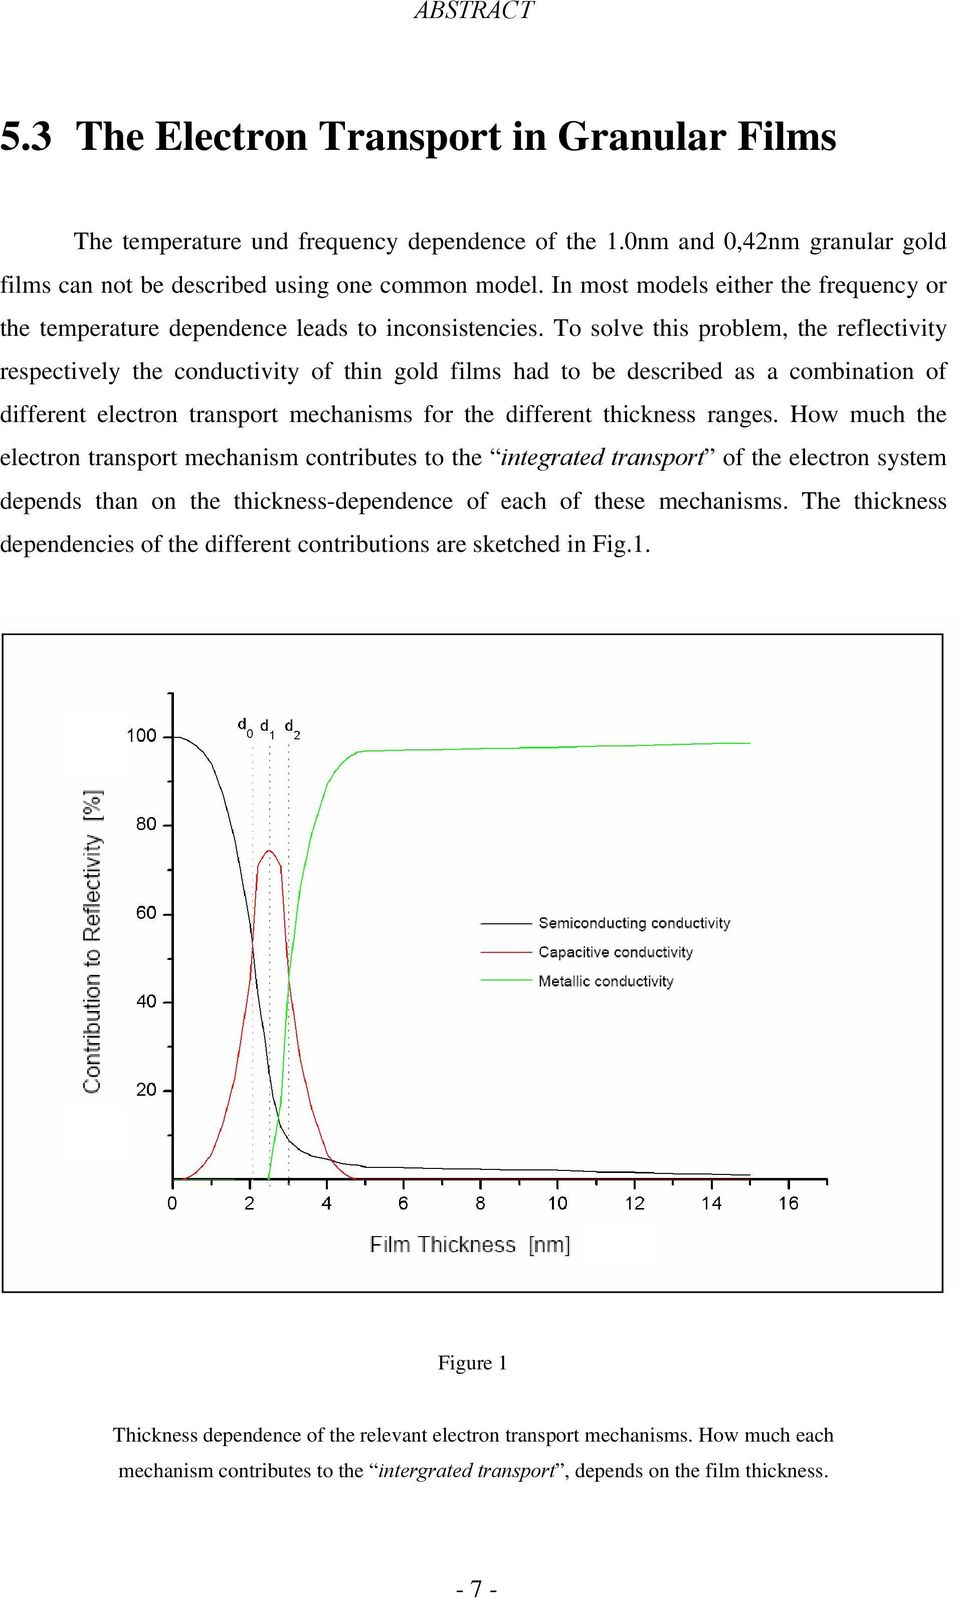 To solve this problem, the reflectivity respectively the conductivity of thin gold films had to be described as a combination of different electron transport mechanisms for the different thickness